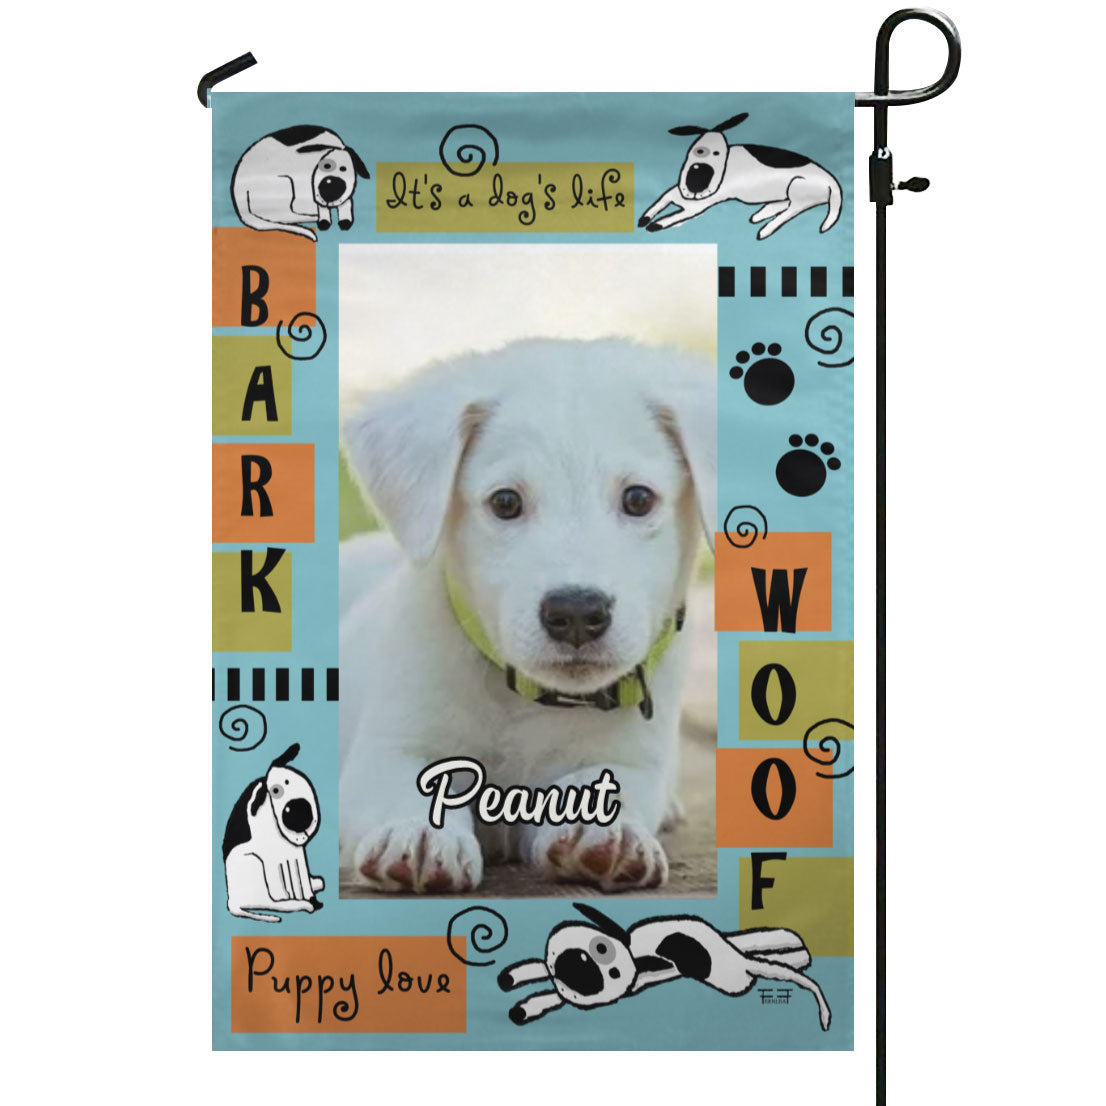 Puppy Love – Personalized Photo & Name – Garden Flag & House Flag